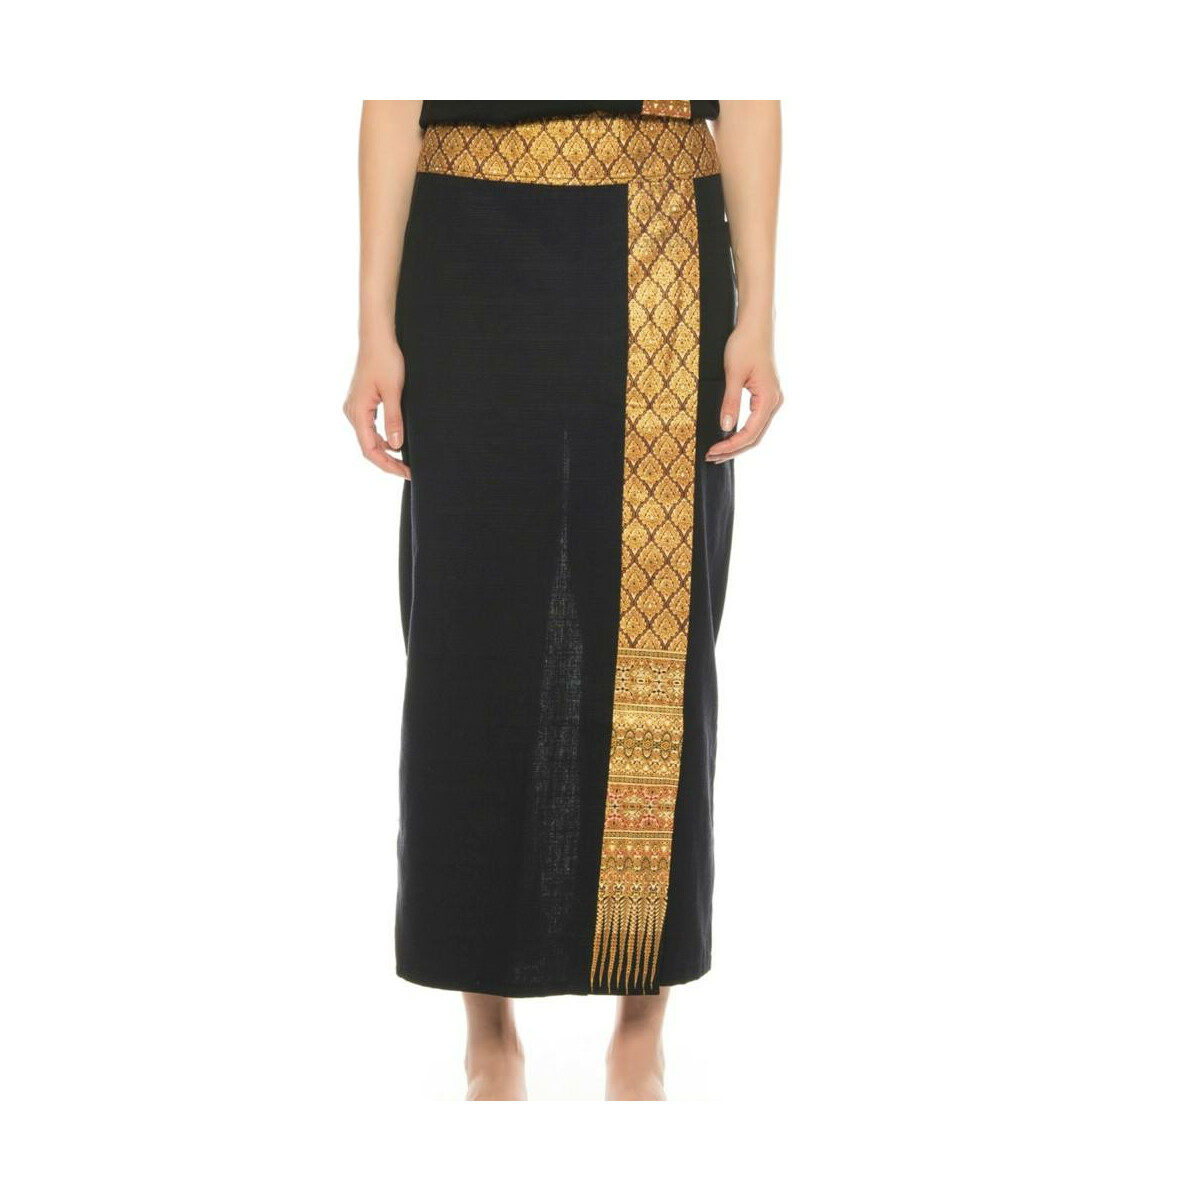 Womens trousers / skirt with traditional Thai pattern...